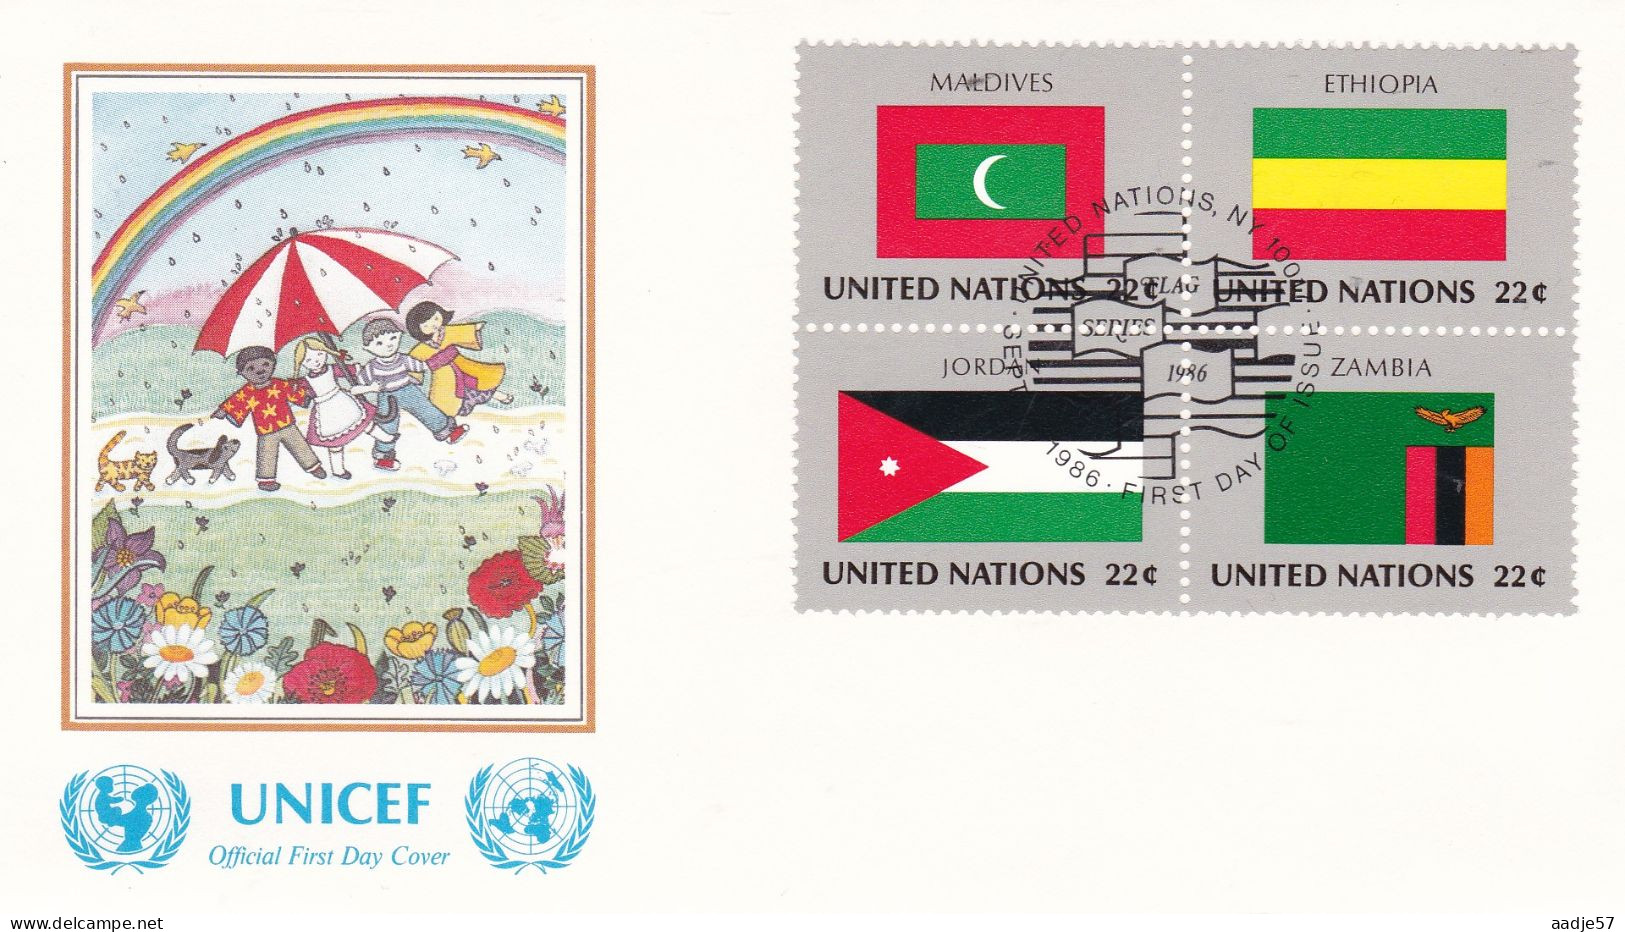 United Nations  1984  On Cover Flag Of The Nations Maldives; Ethiopia; Jordan; Zambia - Enveloppes